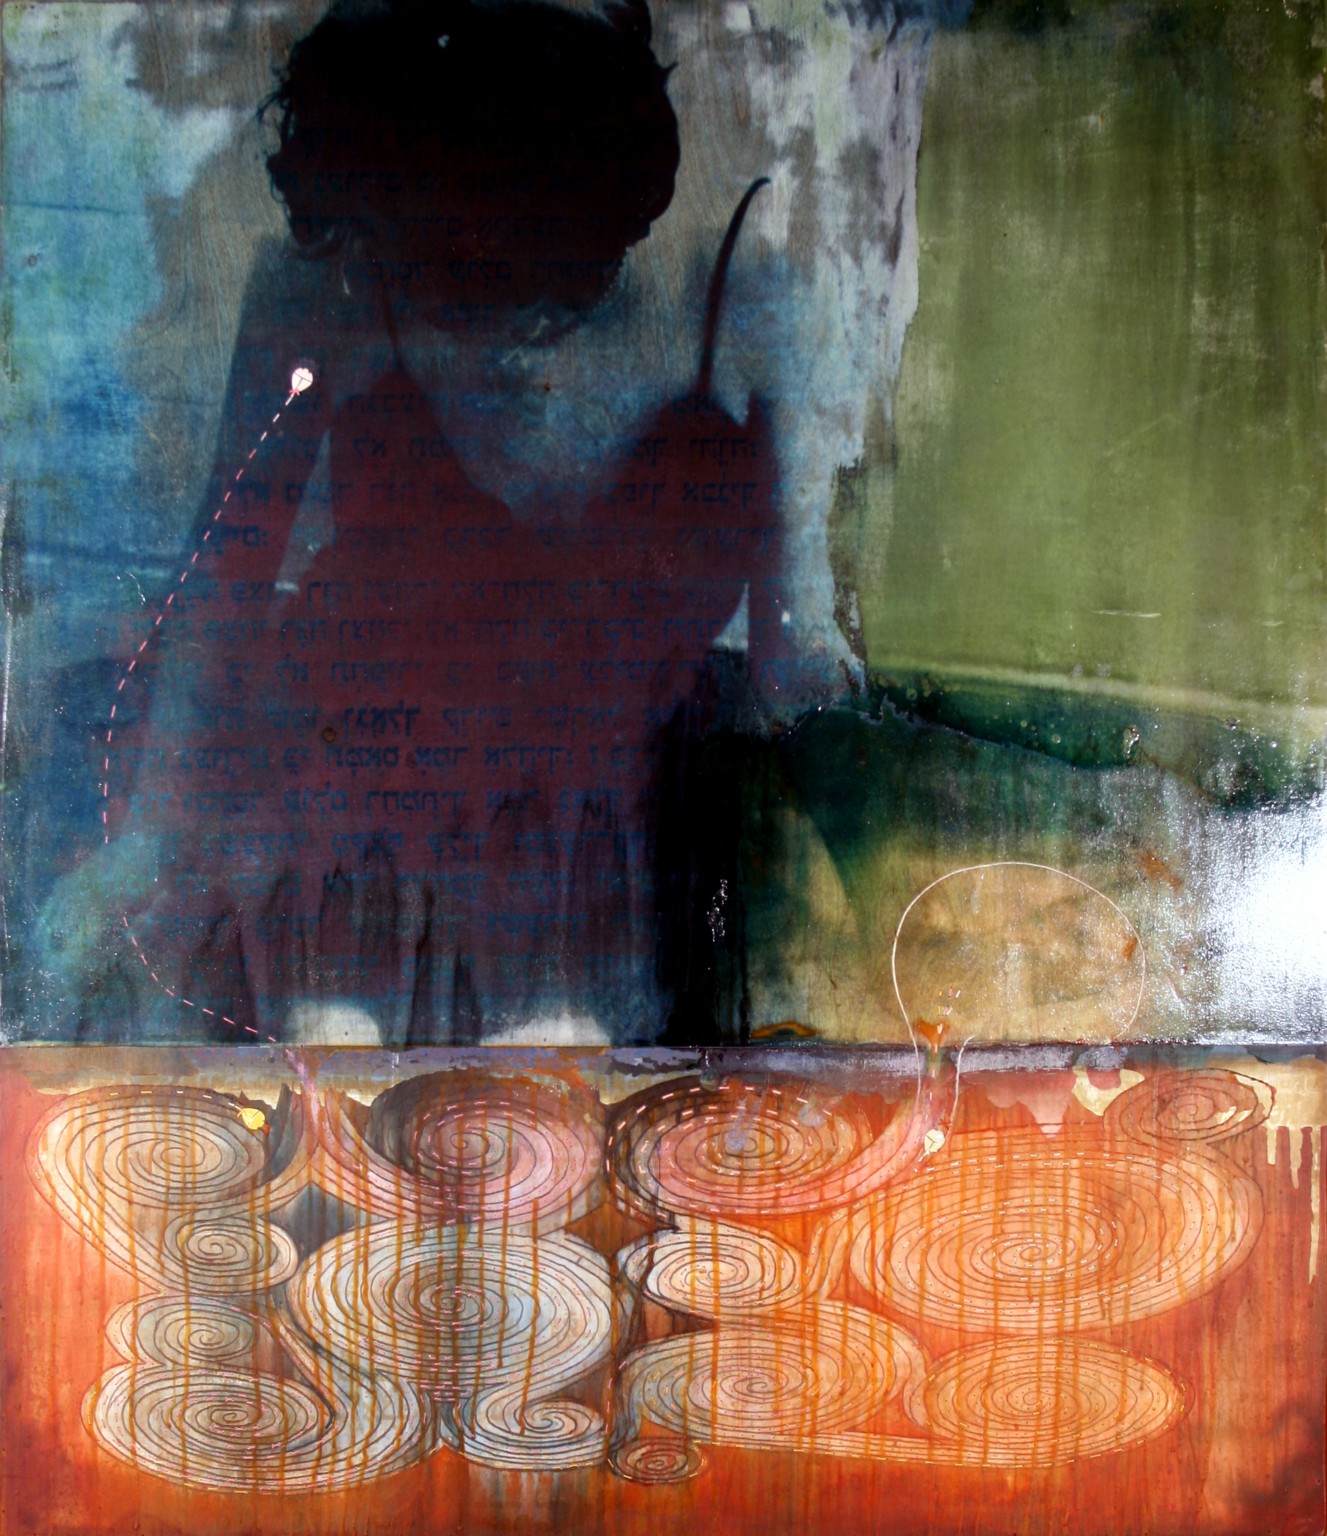 gum dichromate, acrylic, carving, found objects, sewing  48 x 60" (122 x 152cm)